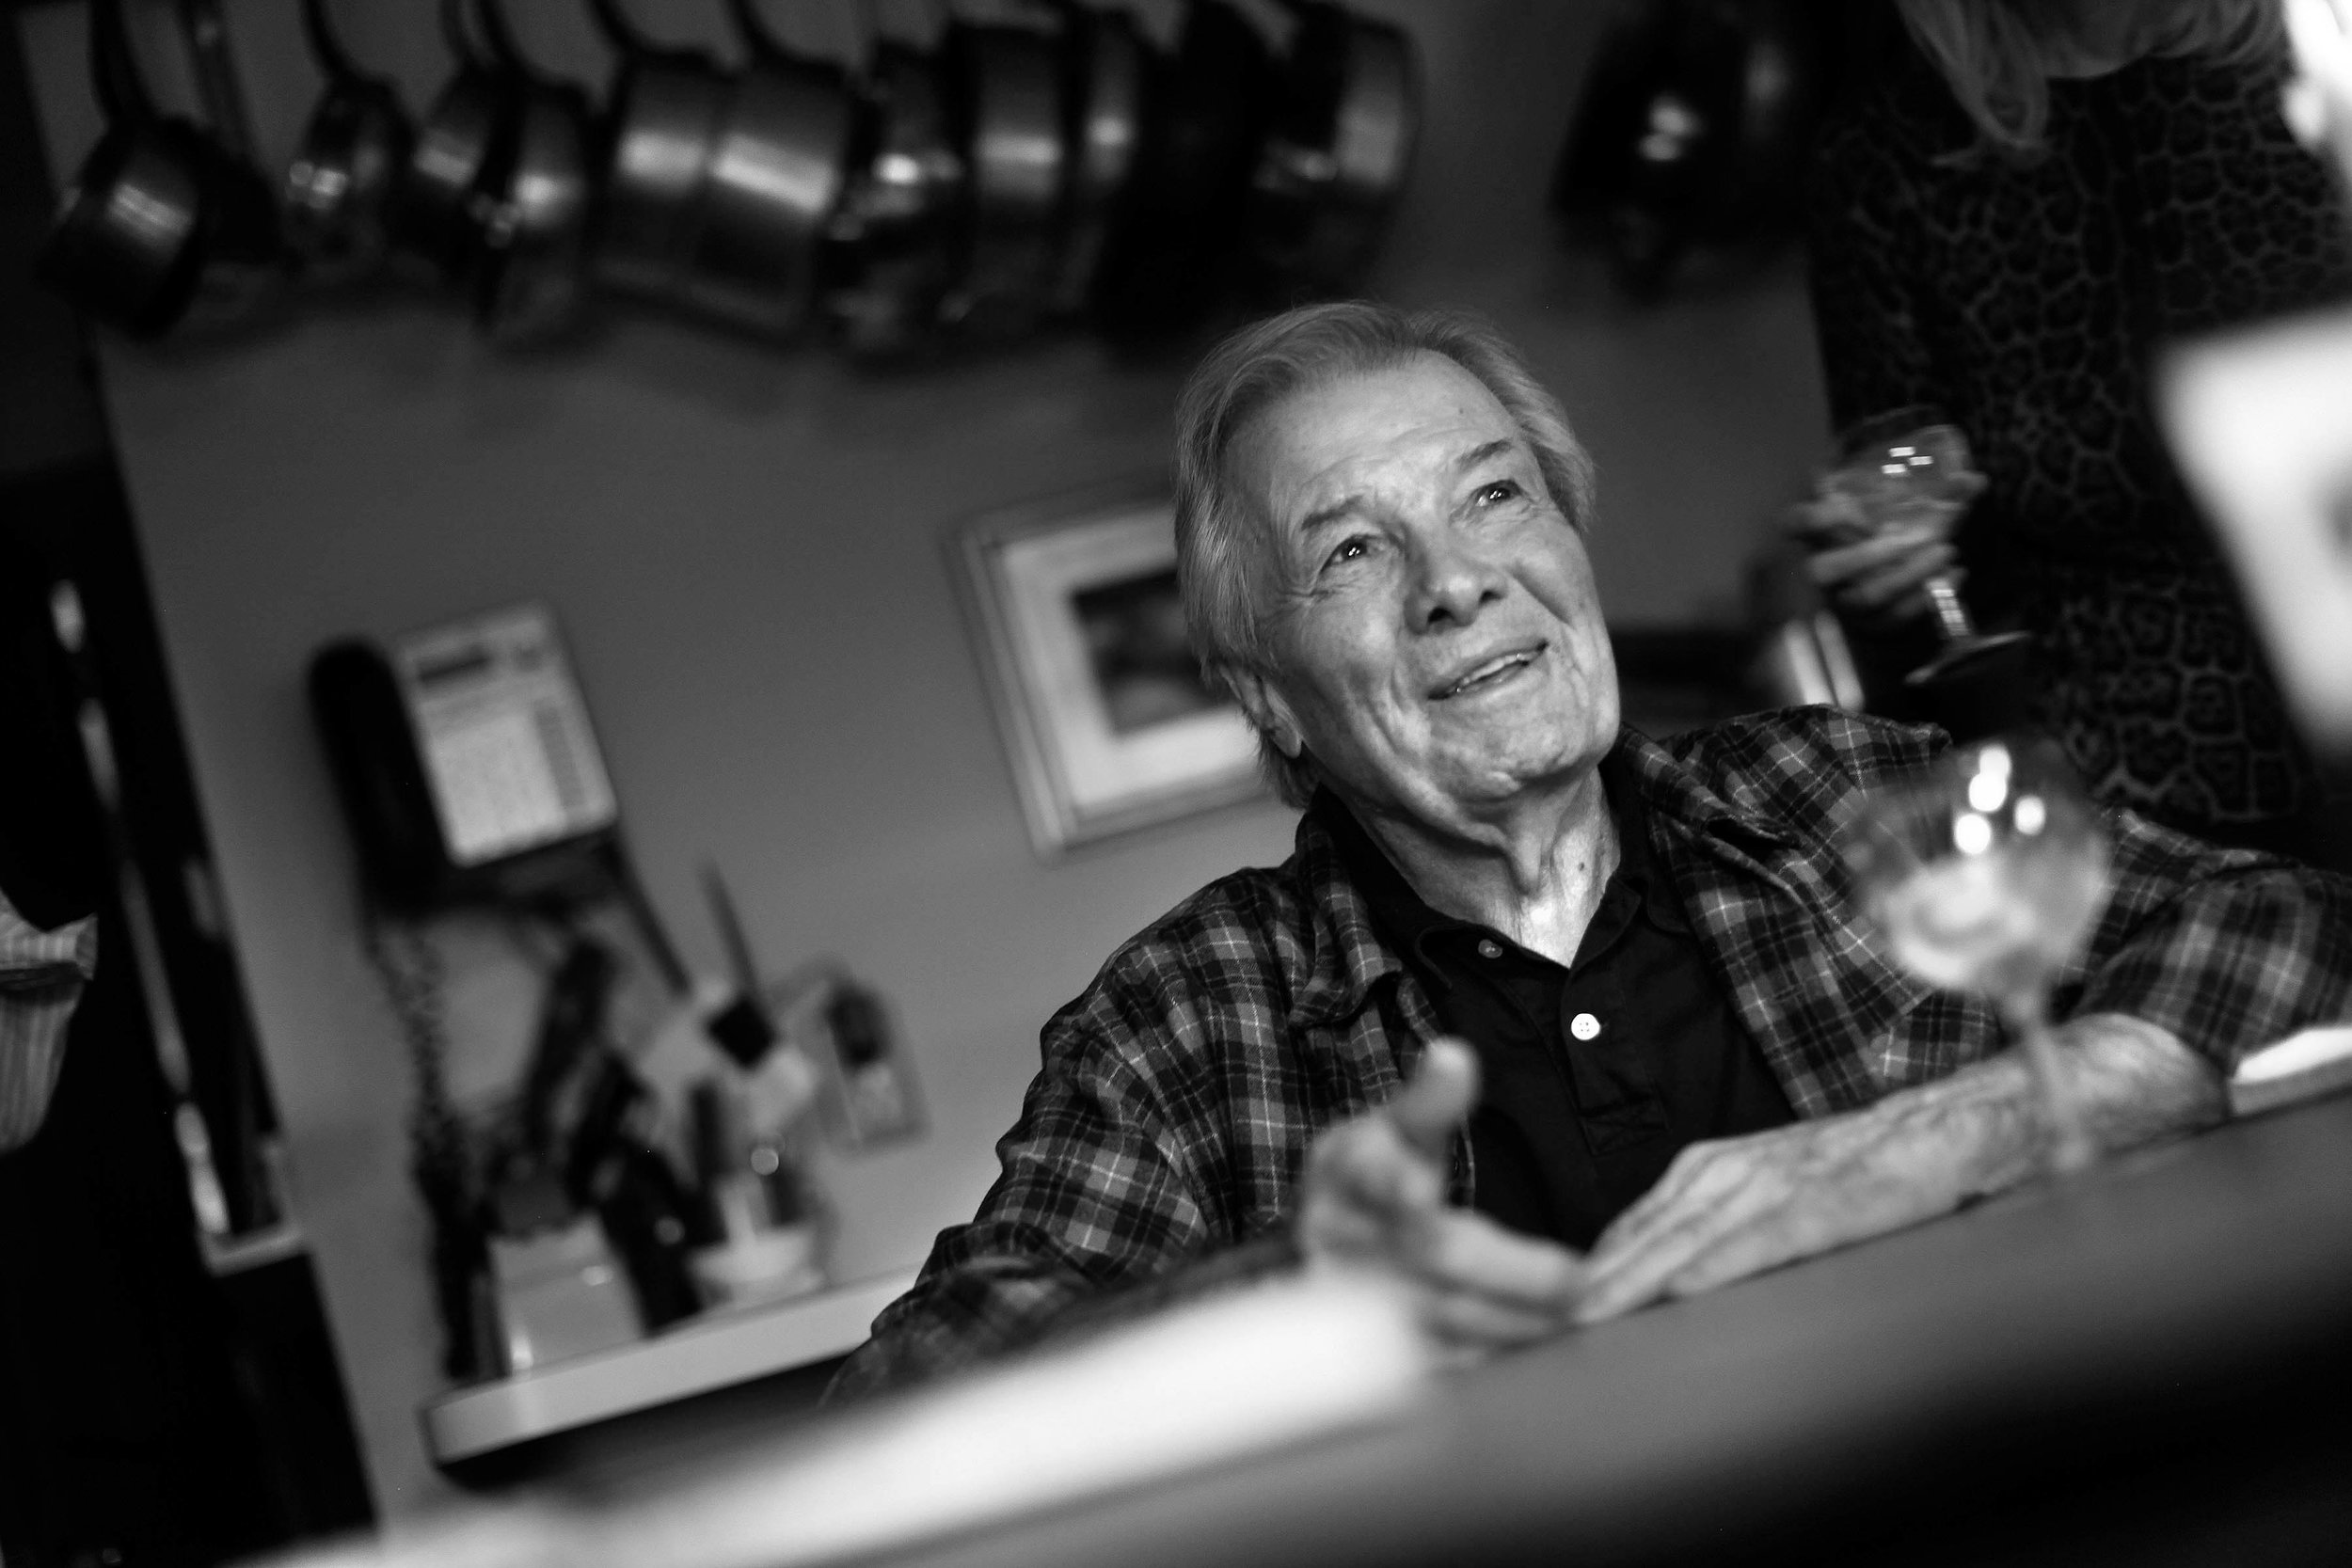 Jacques Pepin - Chef/Author, Madison CT